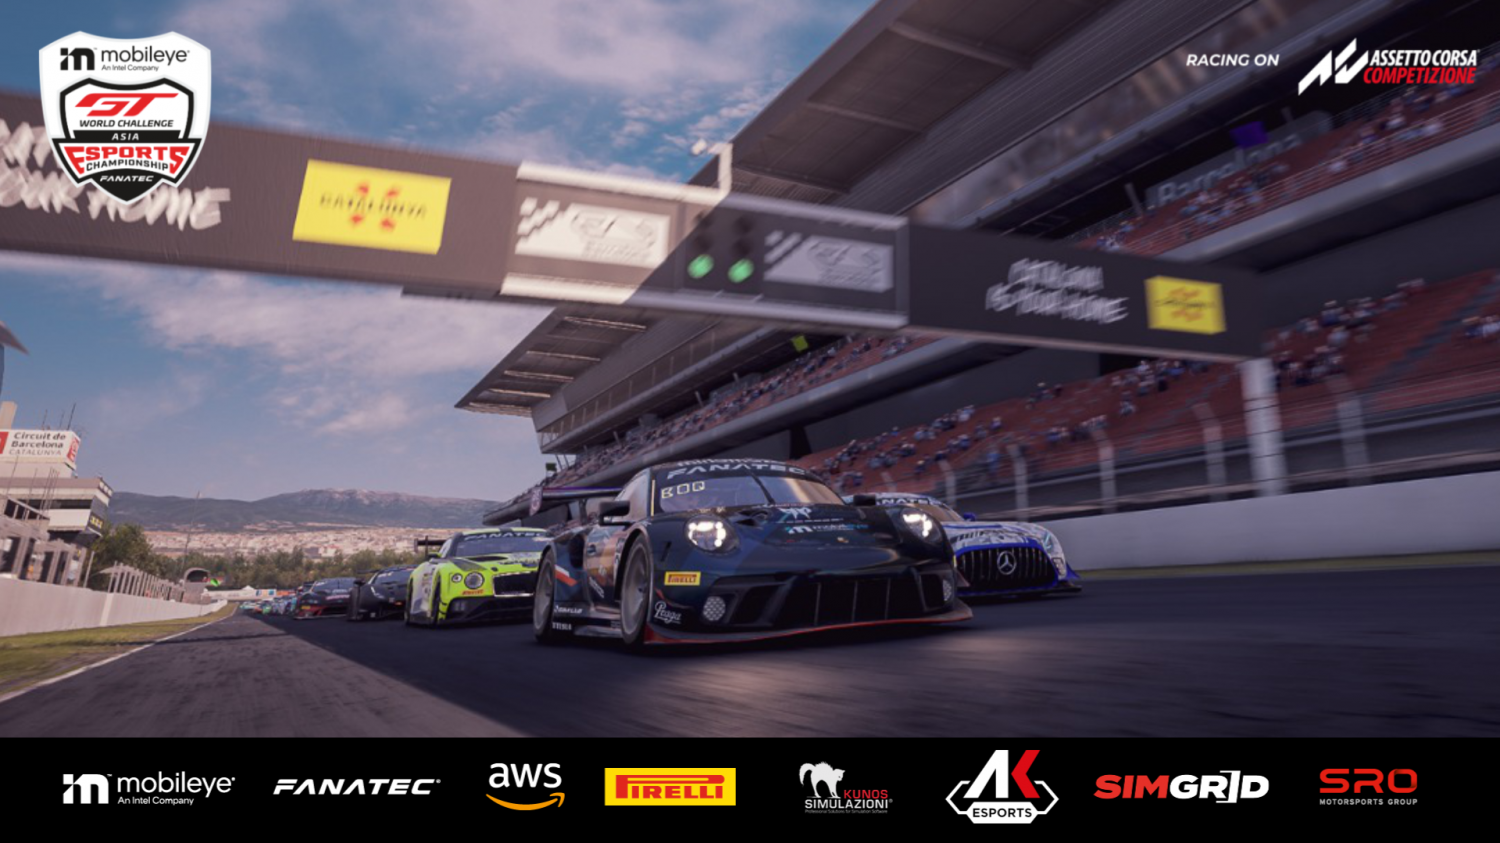 SRO E-sports - Boquida with dominant victory in Mobileye GT World Challenge Asia Esports opening round in Barcelona